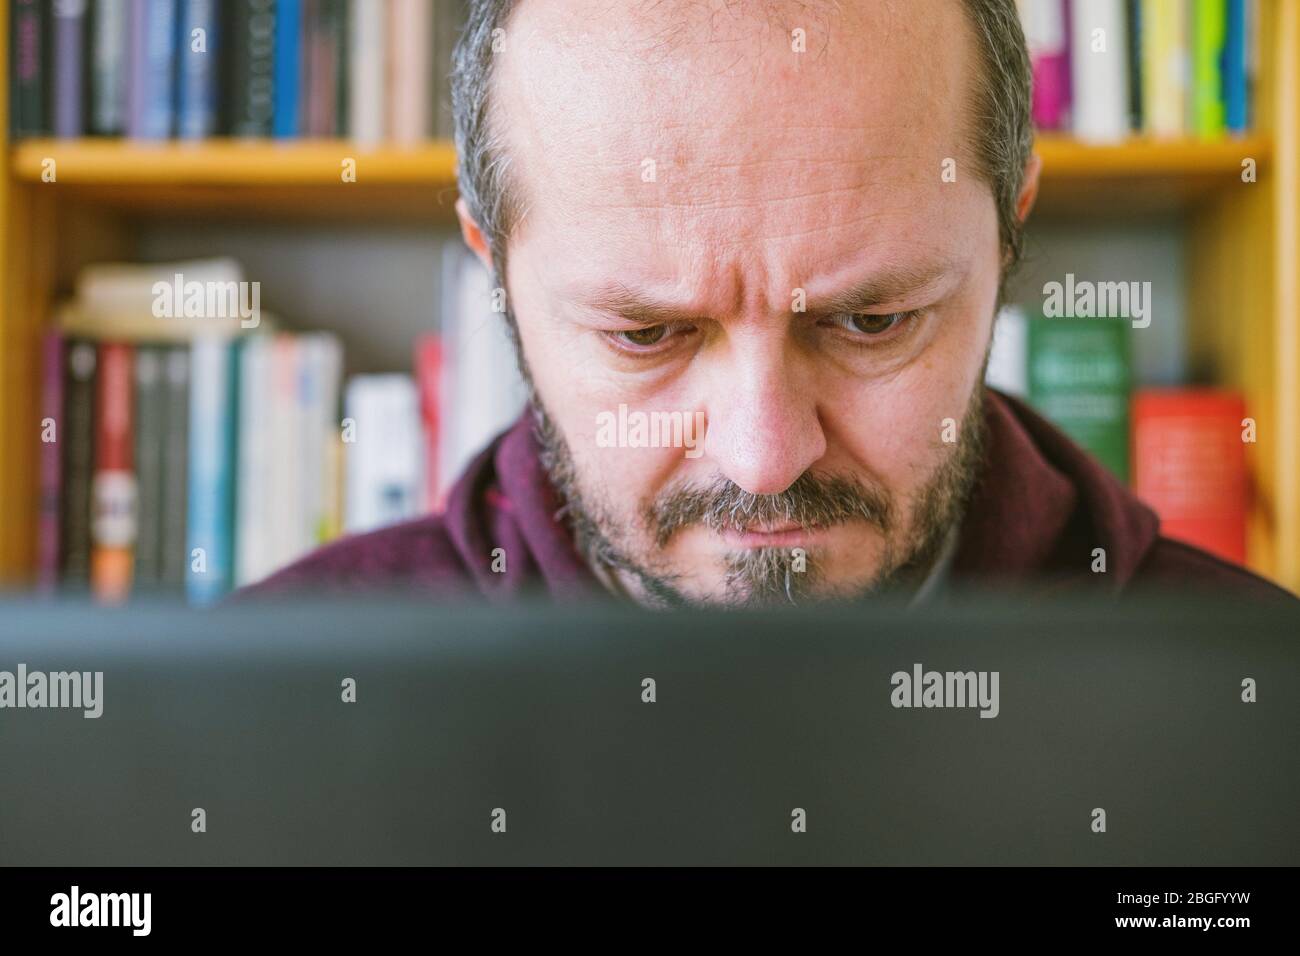 Adult man working from home office. Bearded man dedicated working online from home on computer laptop, book shelves behind him. Close up. Stock Photo